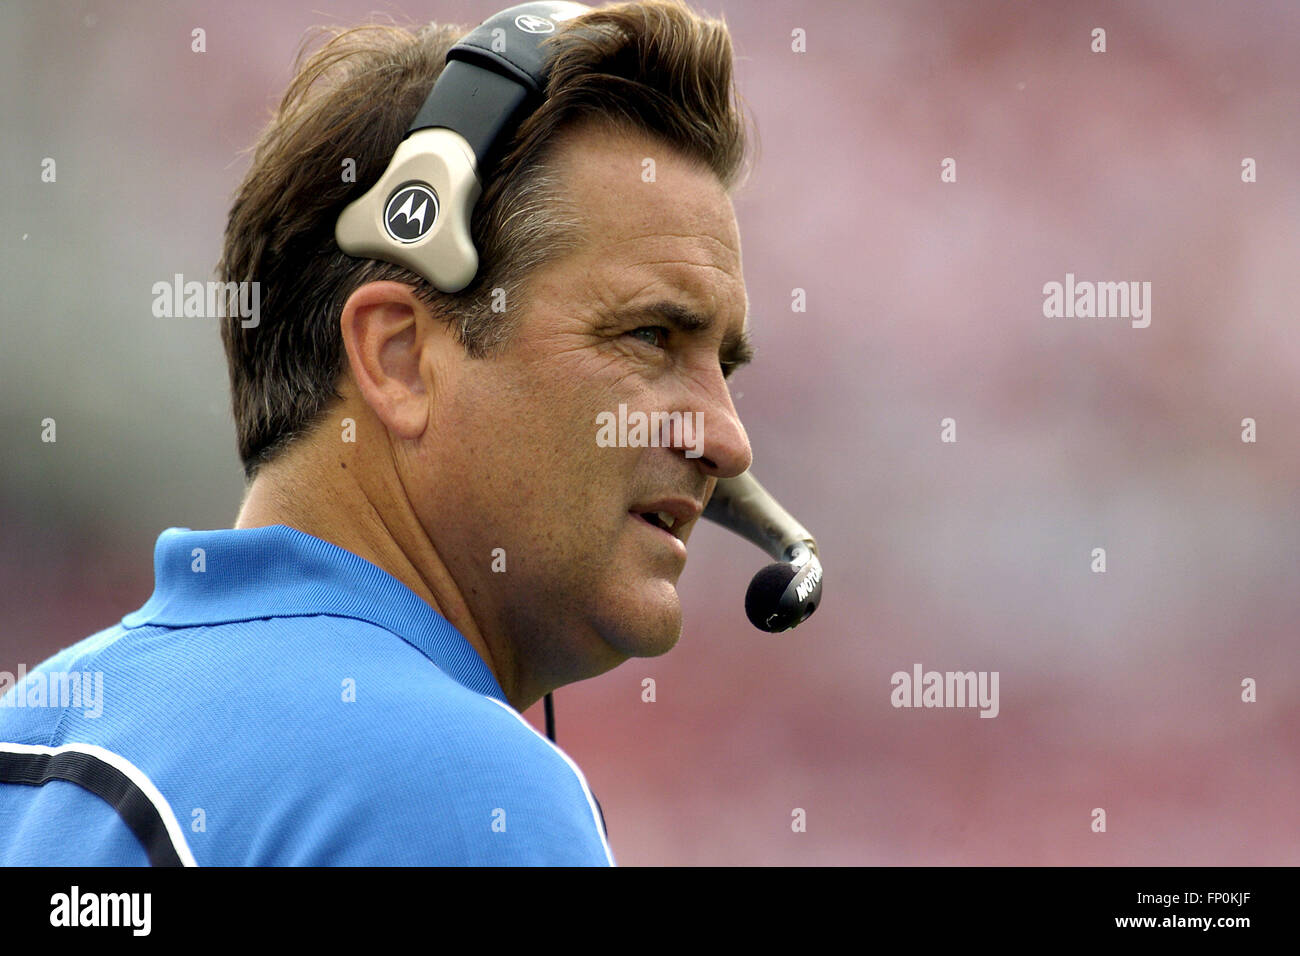 Tampa, Florida, USA. 2nd Oct, 2005. Oct. 5, 2005; Tampa, FL, USA; Detroit Lions coach Steve Mariucci during the second half of the Lions game against the Tampa Bay Buccaneers at Raymond James Stadium. The Bucs won the game 17-13. © Scott A. Miller/ZUMA Wire/Alamy Live News Stock Photo